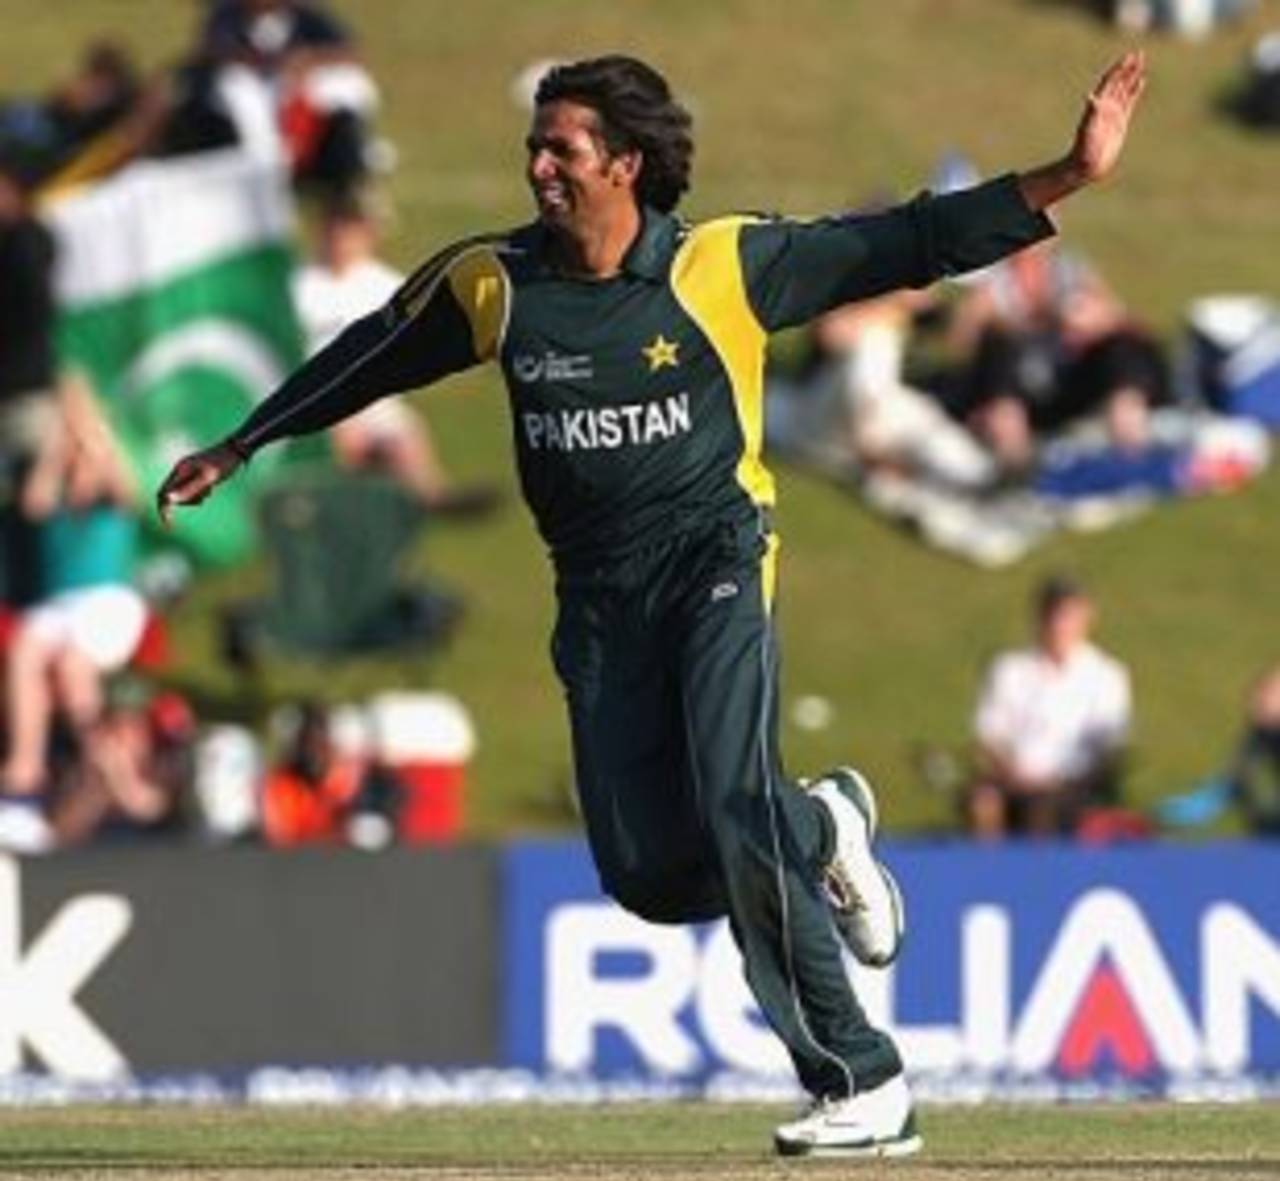 To be frank, nothing Mohammad Asif had done till then prepared anyone for this, only his past&nbsp;&nbsp;&bull;&nbsp;&nbsp;Getty Images